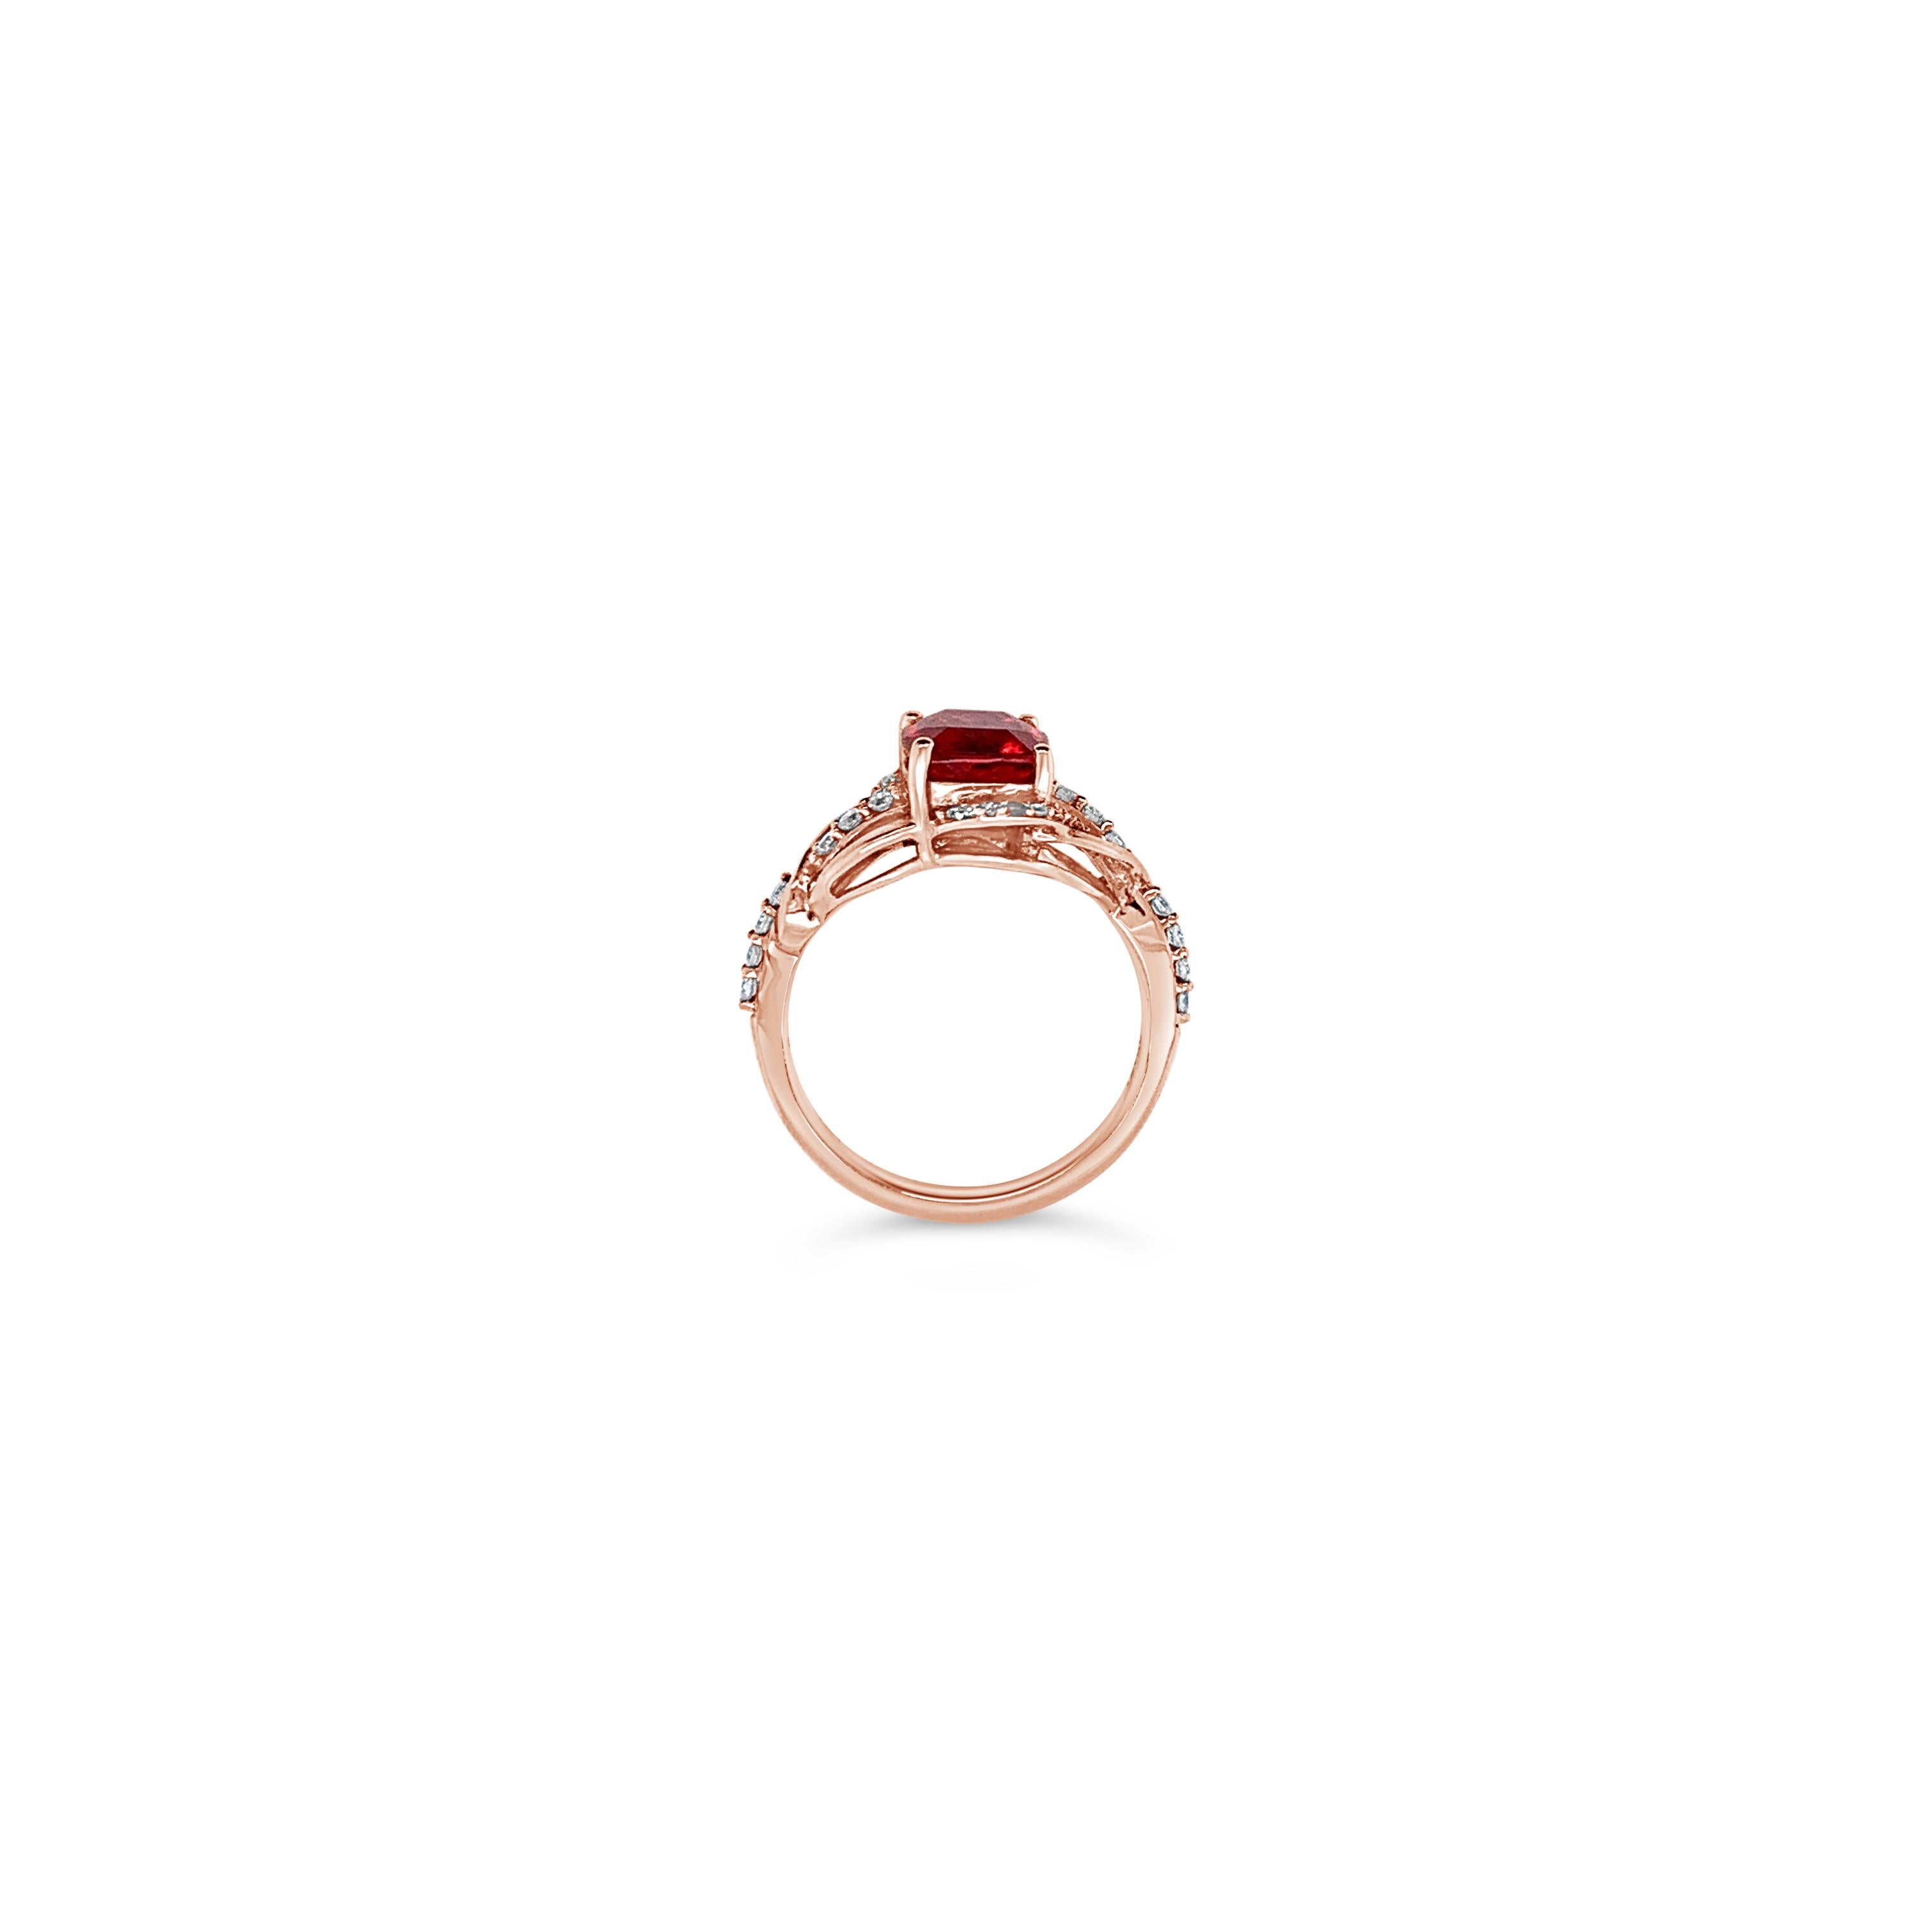 Le Vian® Ring featuring 2.20 cts. Raspberry Rubellite™, 0.29 cts. Vanilla Diamonds®  set in 14K Strawberry Gold®

Ring size 7. Ring may or may not be sizable.

Please feel free to reach out with any questions! Item comes with a Le Vian® jewelry box